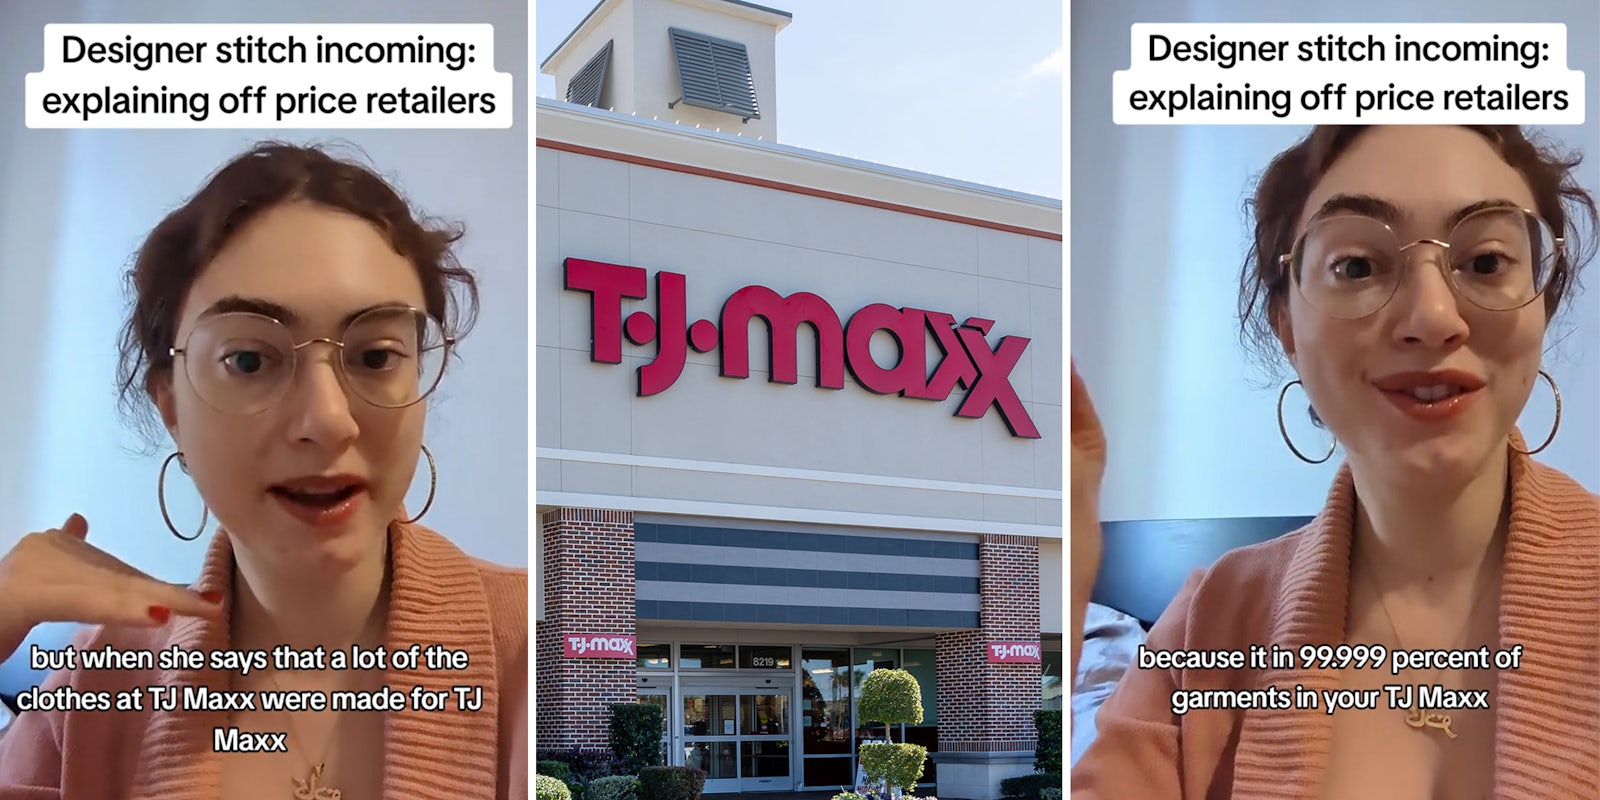 Expert says designer clothes at T.J. Maxx, other off-price retailers aren’t actually overstock